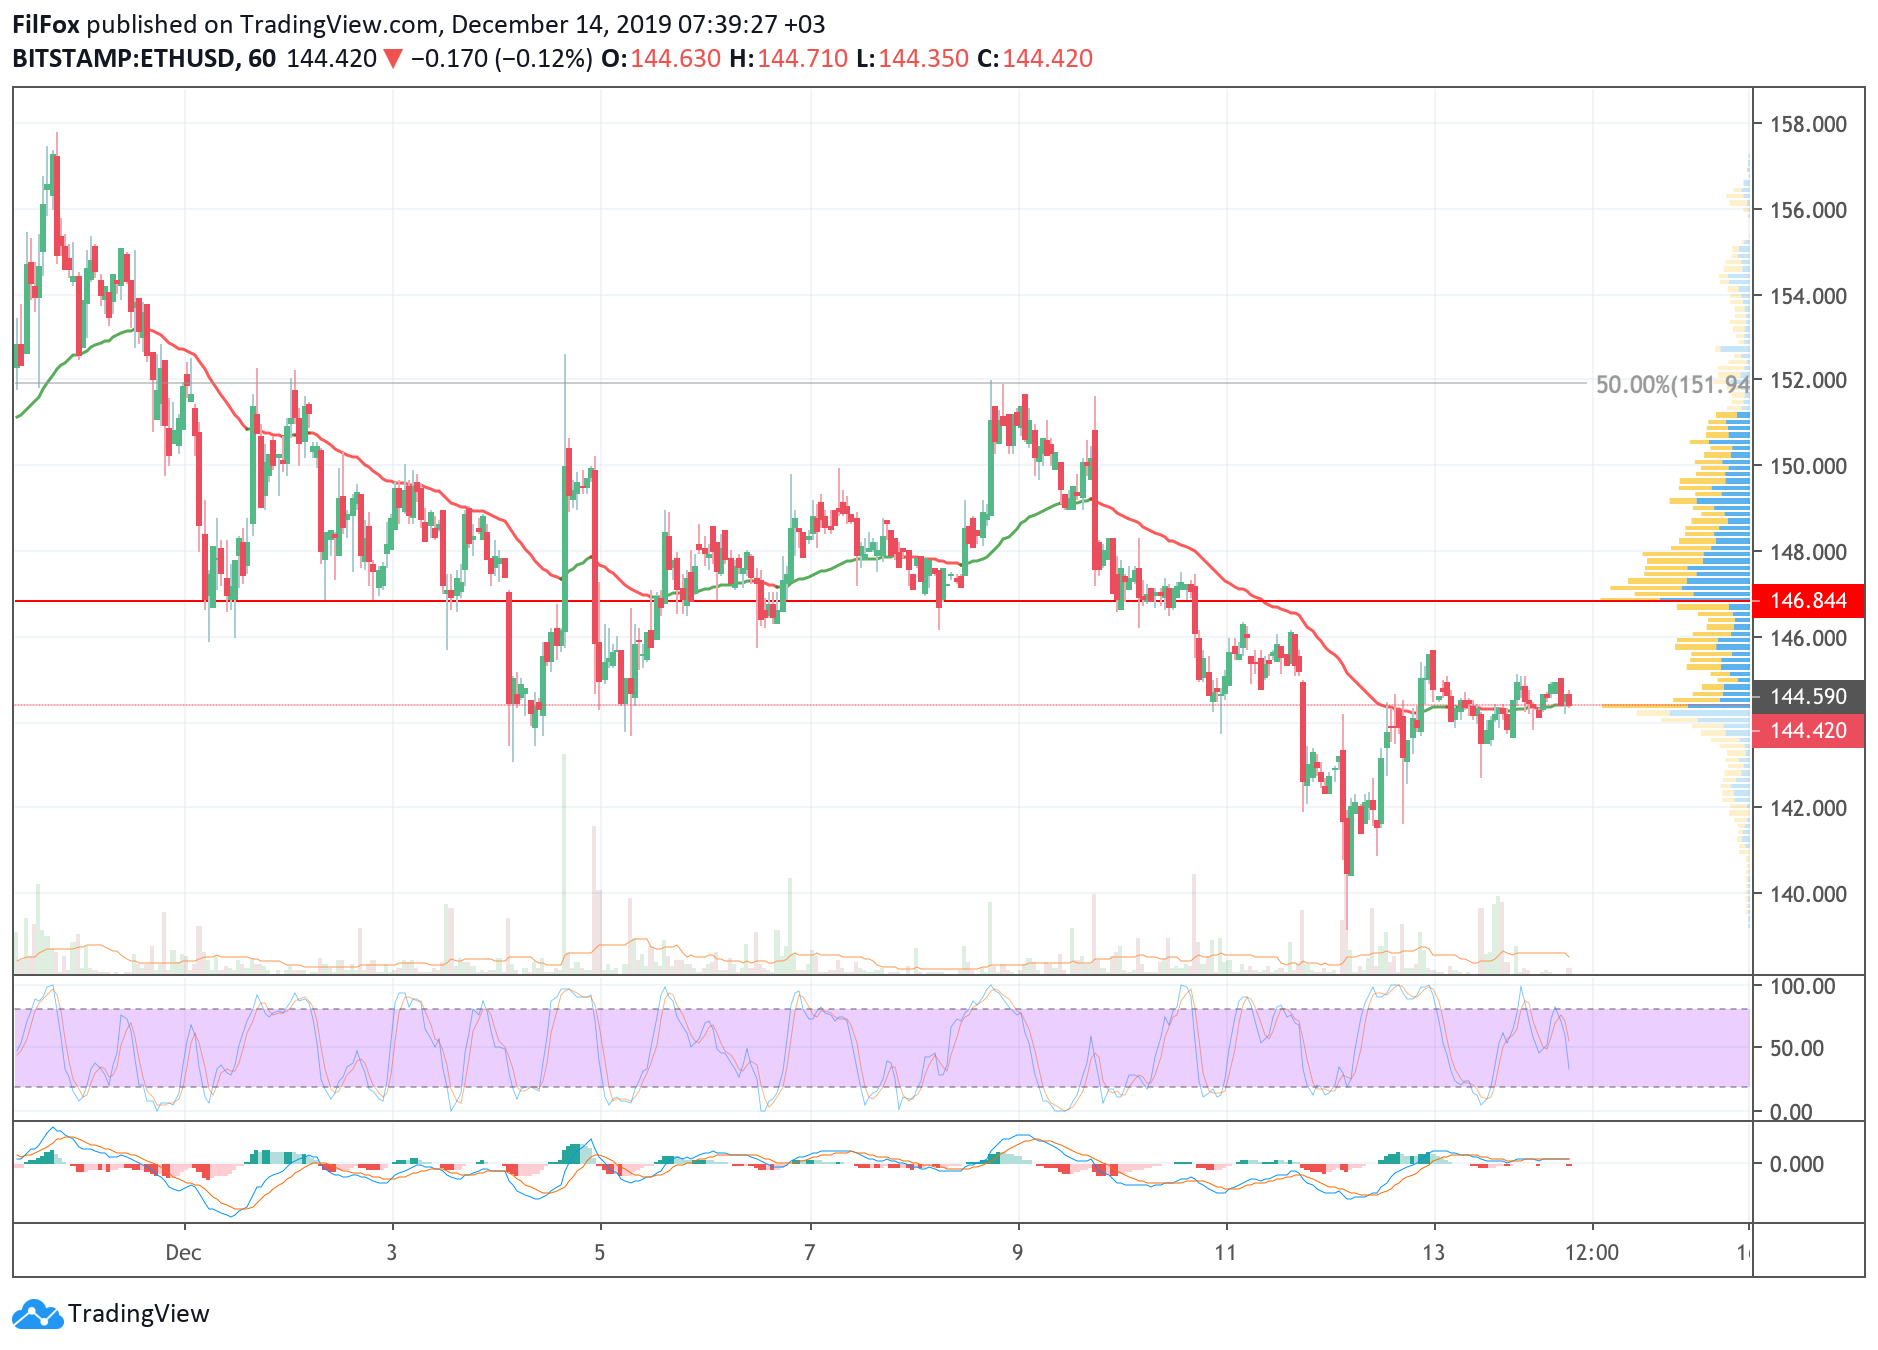 Analysis of cryptocurrency pairs BTC / USD, ETH / USD and XRP / USD on 12/14/2019